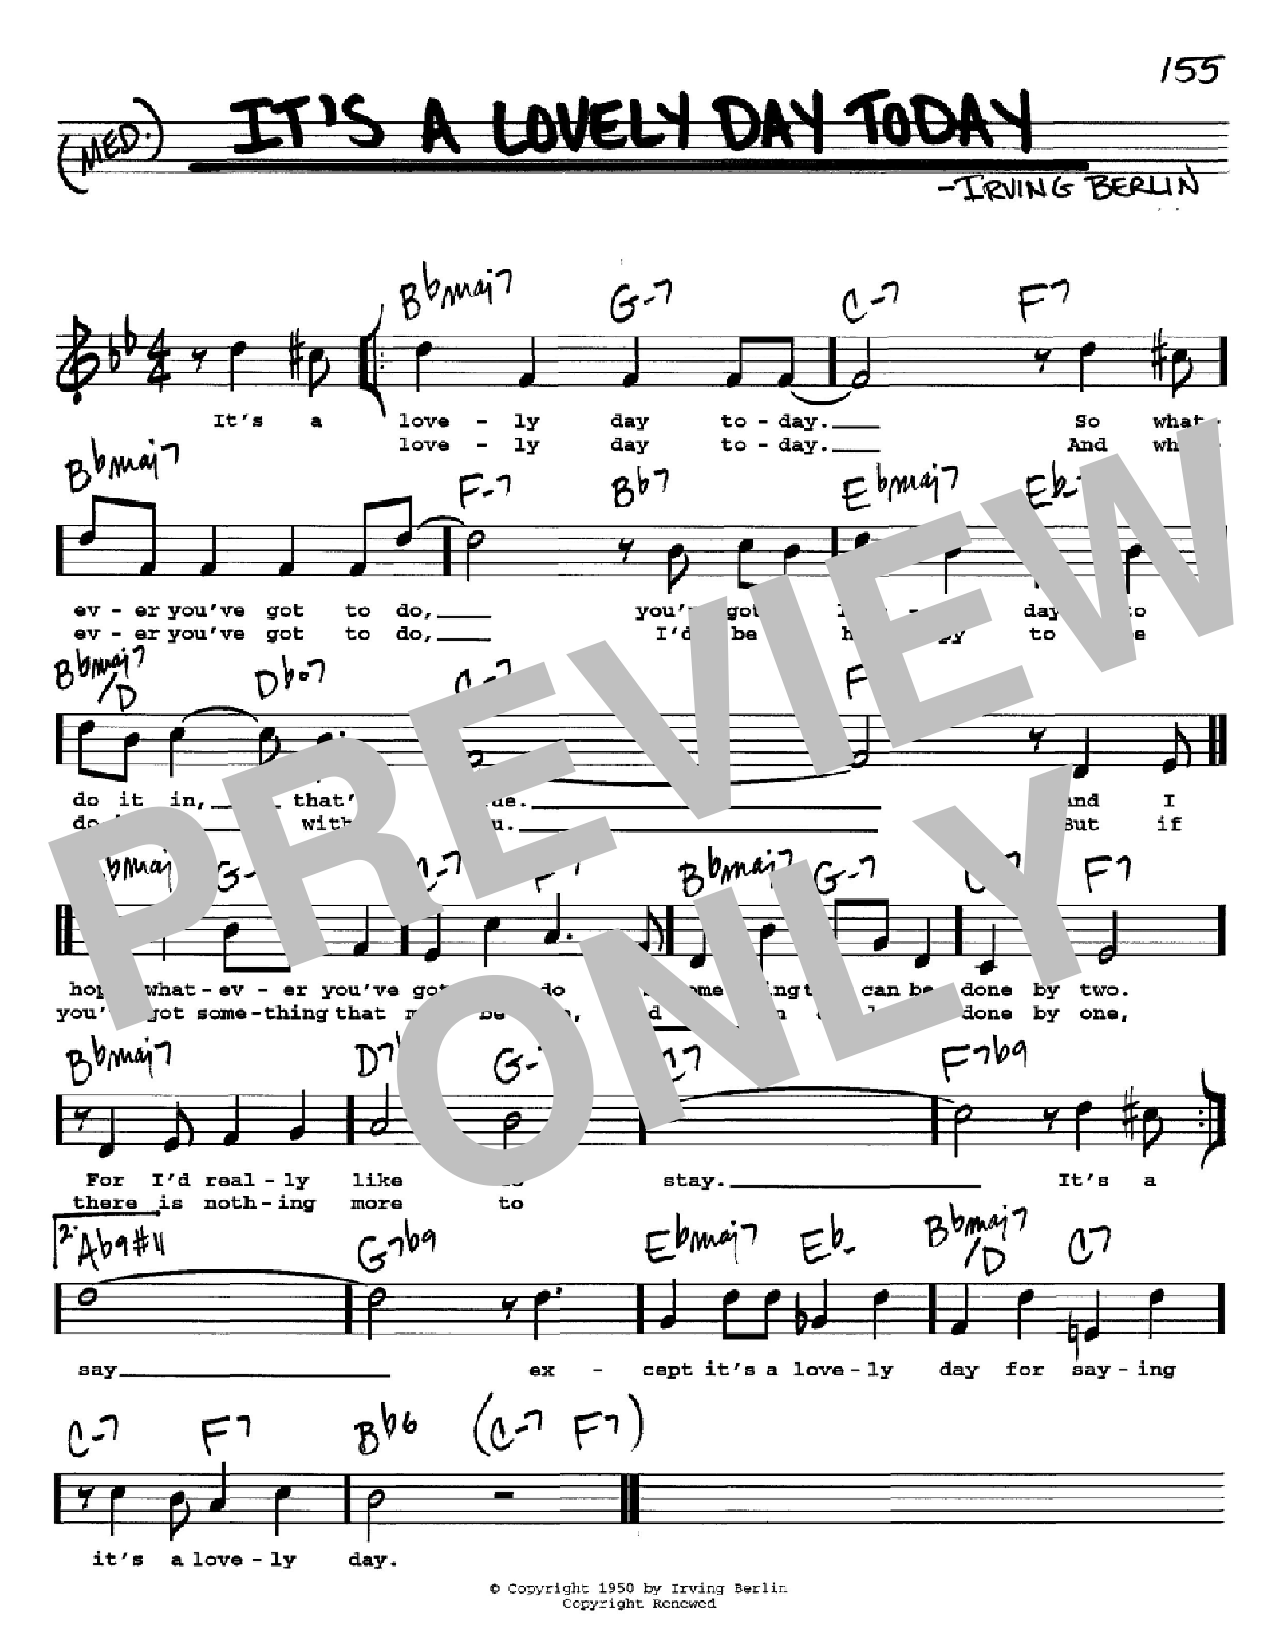 Download Irving Berlin It's A Lovely Day Today Sheet Music